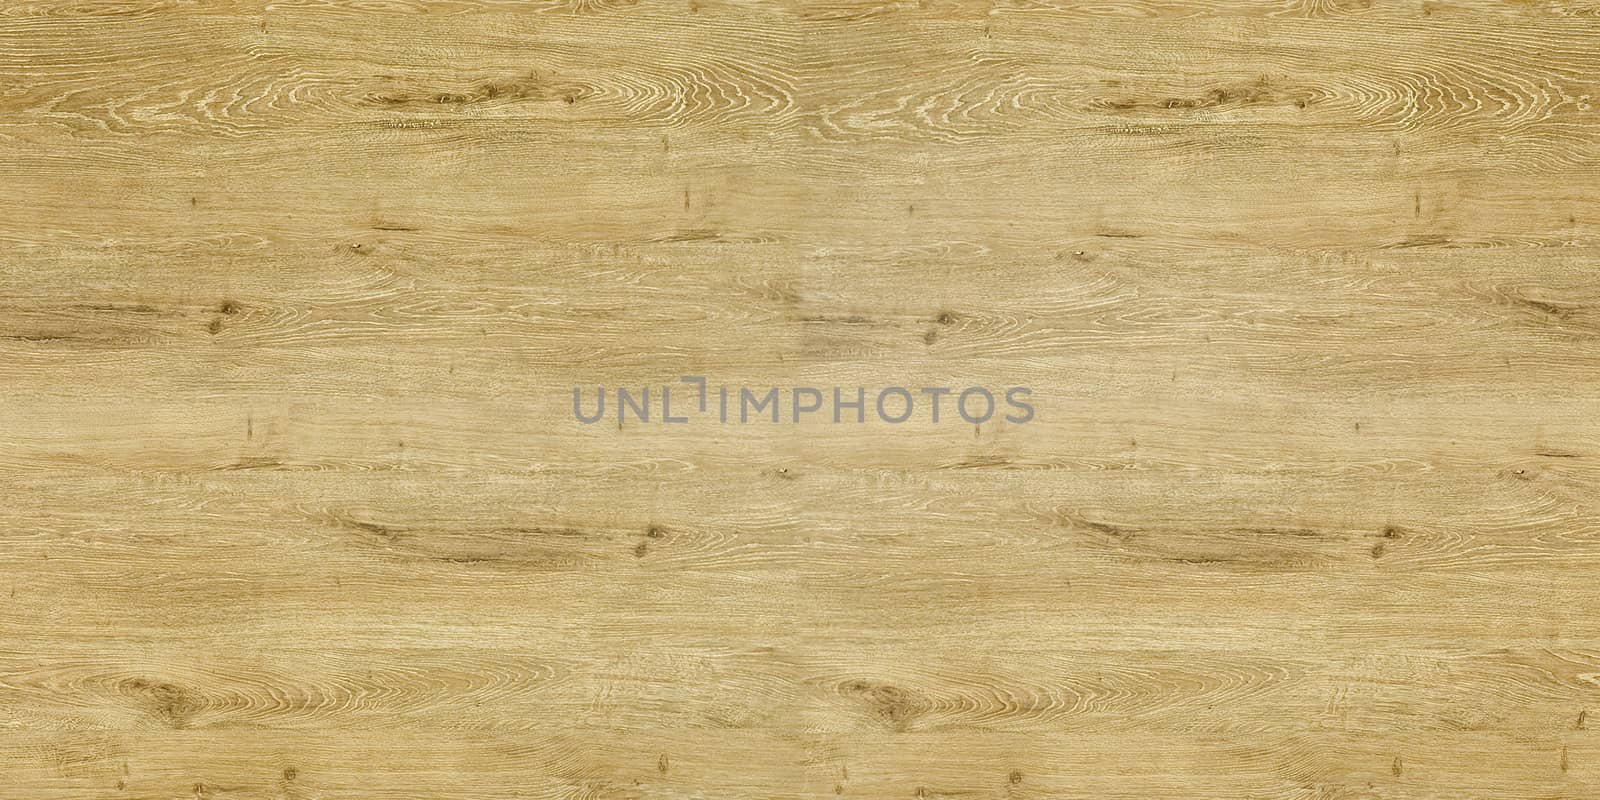 Wooden floor with light brown Board texture background images